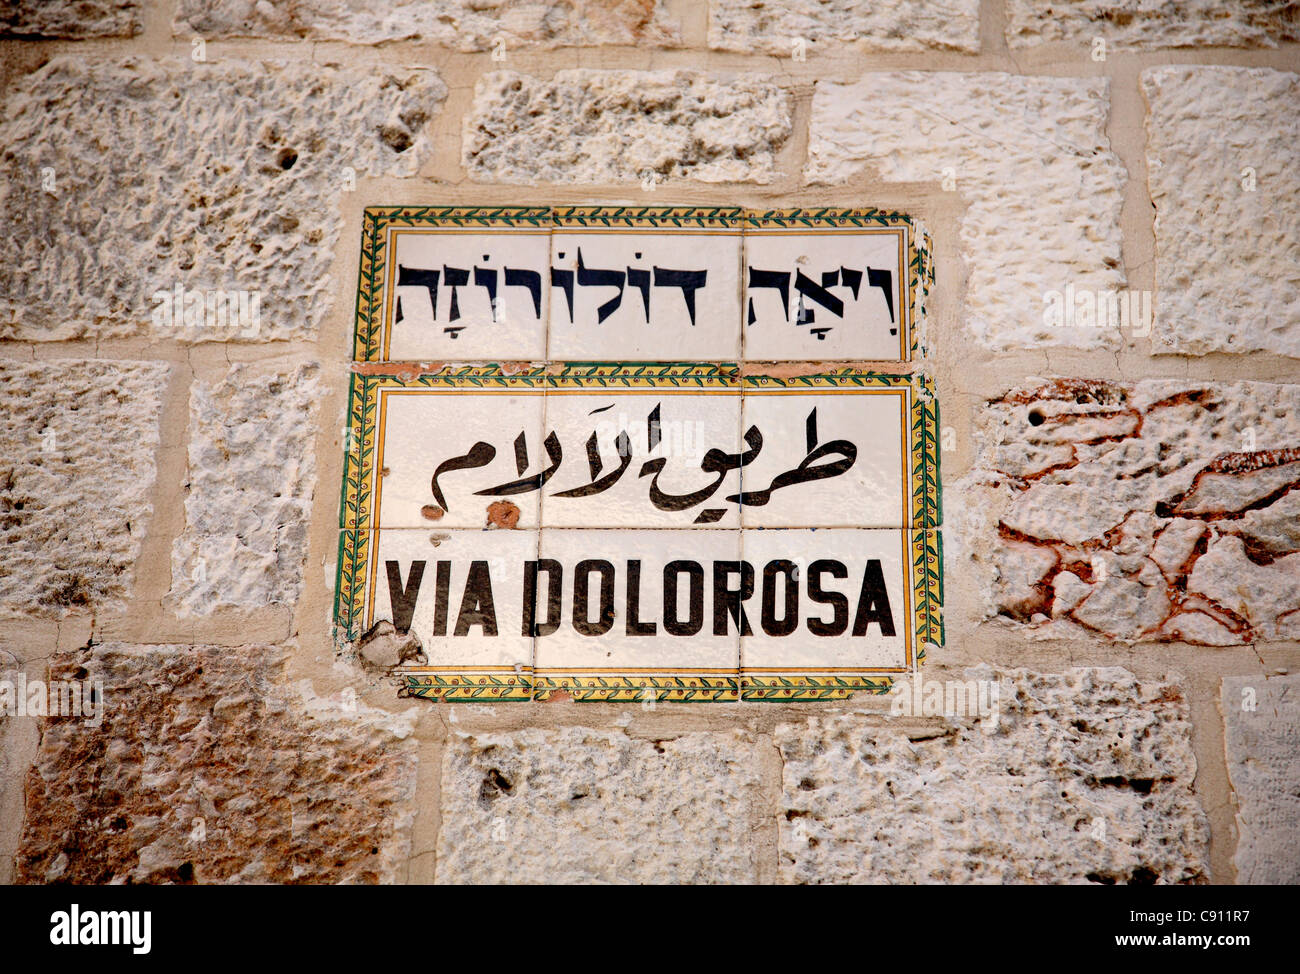 Jerusalem is the capital city of Israel and a major Christian centre such as the Via Dolorosa which is presumed to be Christ's Stock Photo